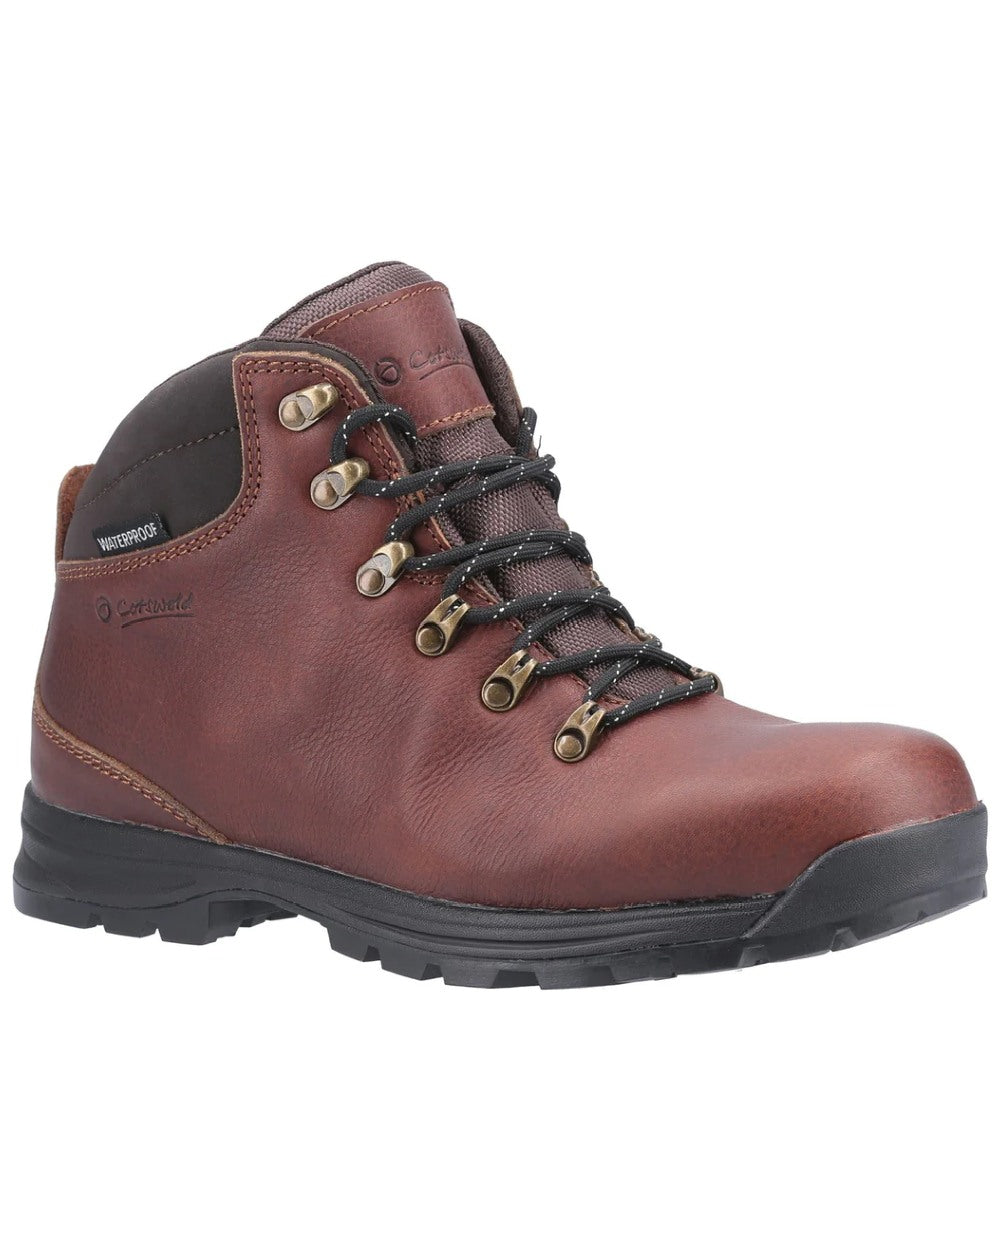 Cotswold Kingsway Hiking Shoes in Brown